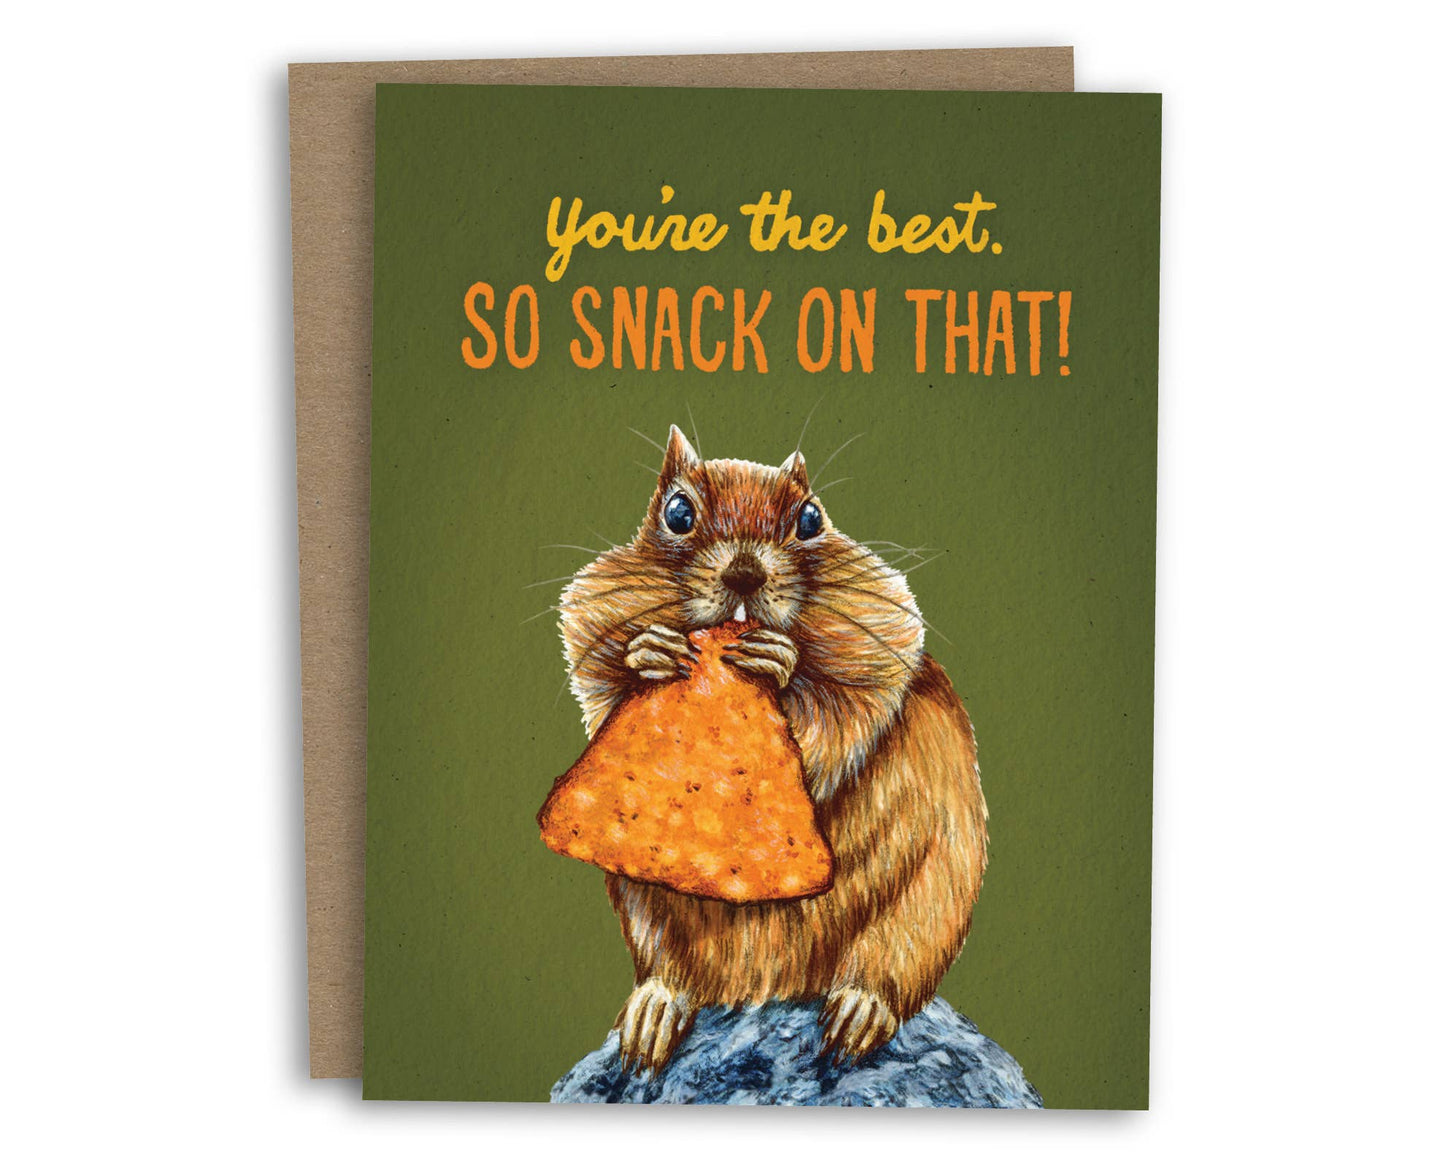 So Snack on That! Greeting Card